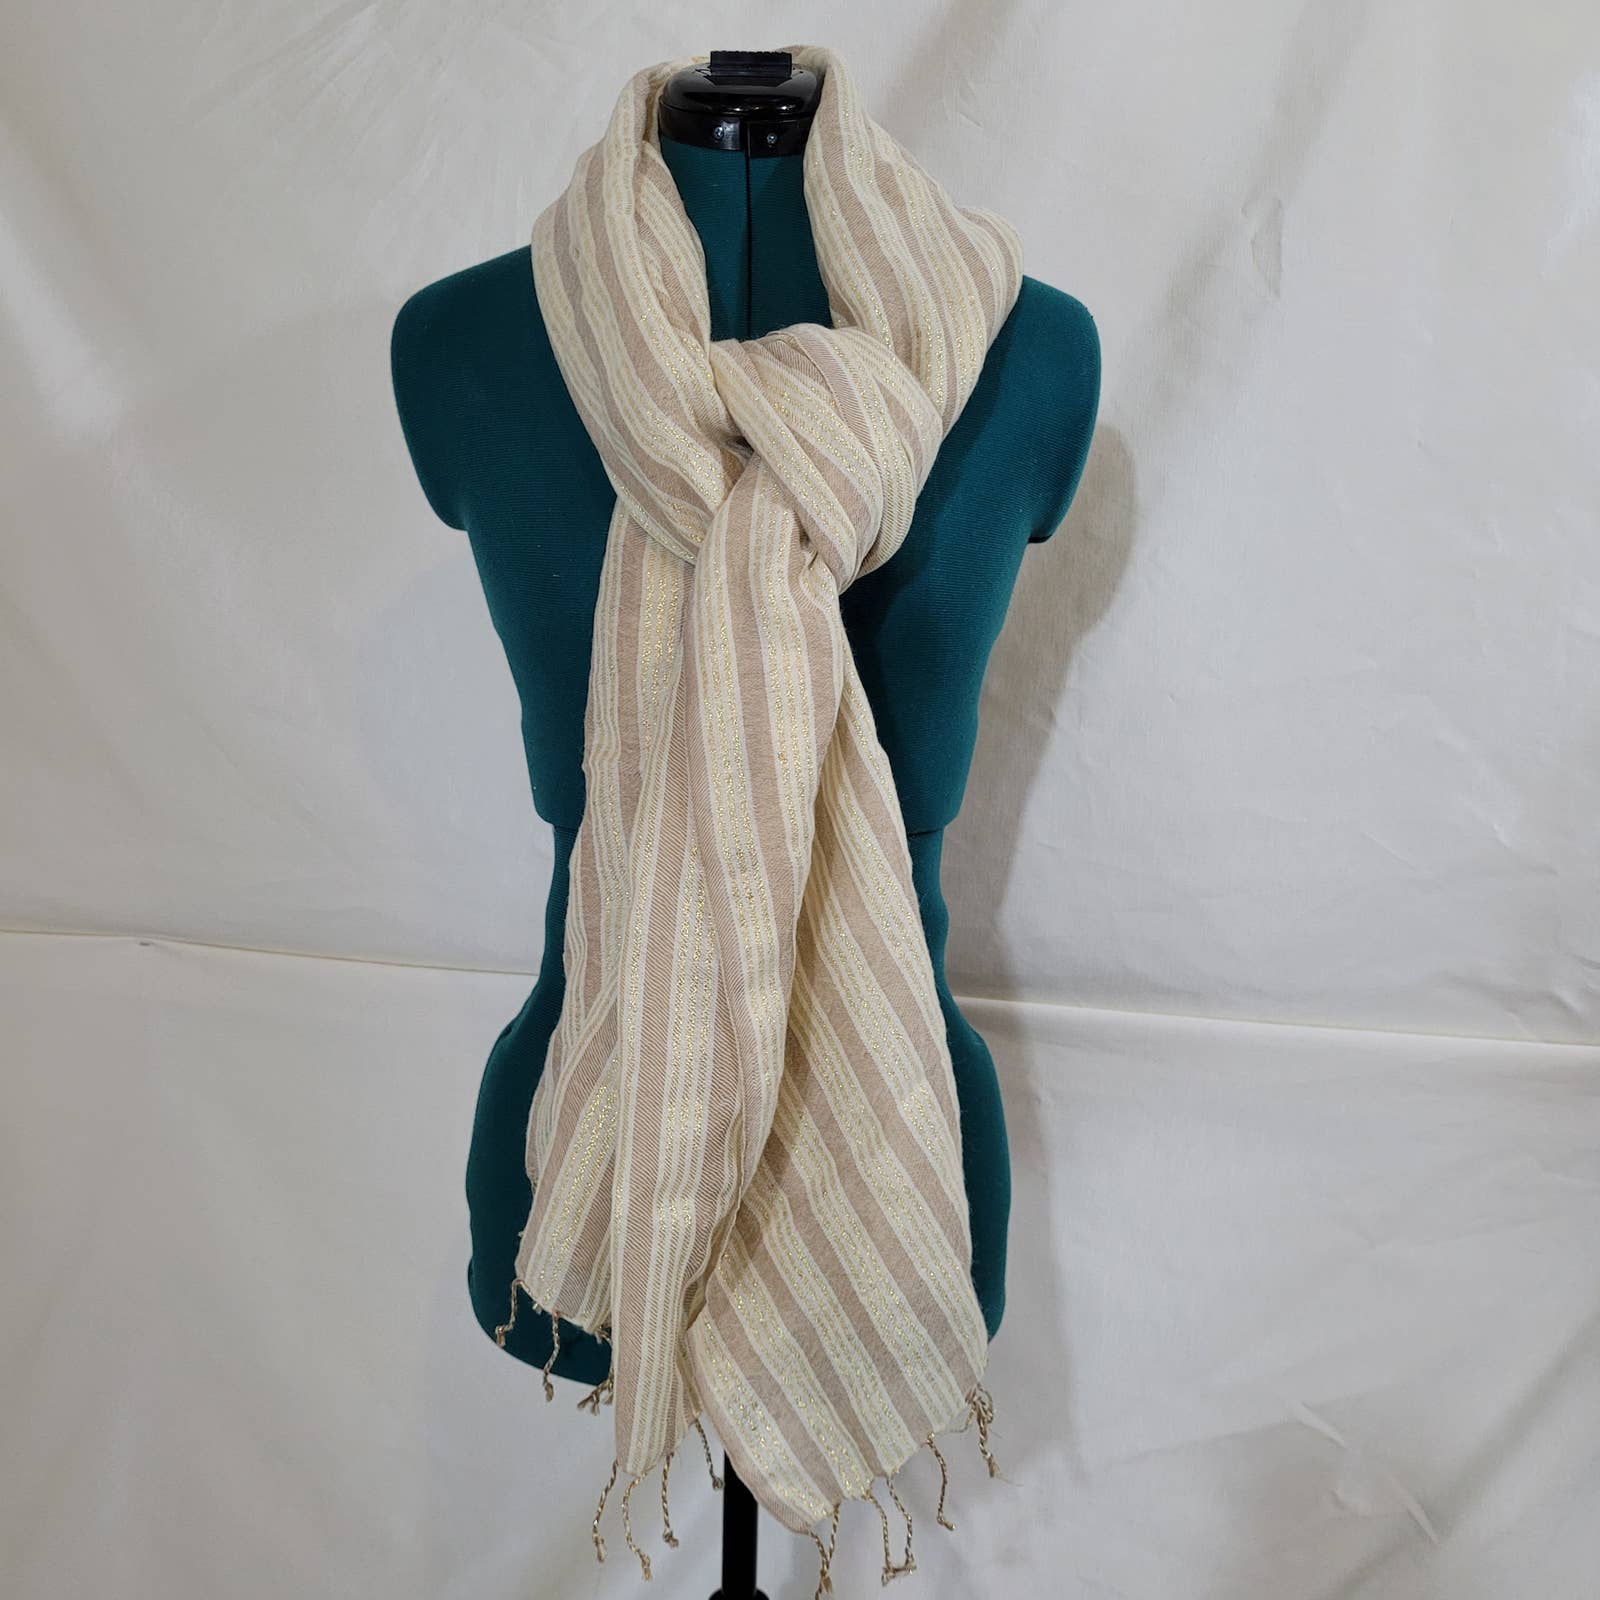 Beige Striped Shawl Scarf with Gold AccentsMarkita's ClosetUnbranded